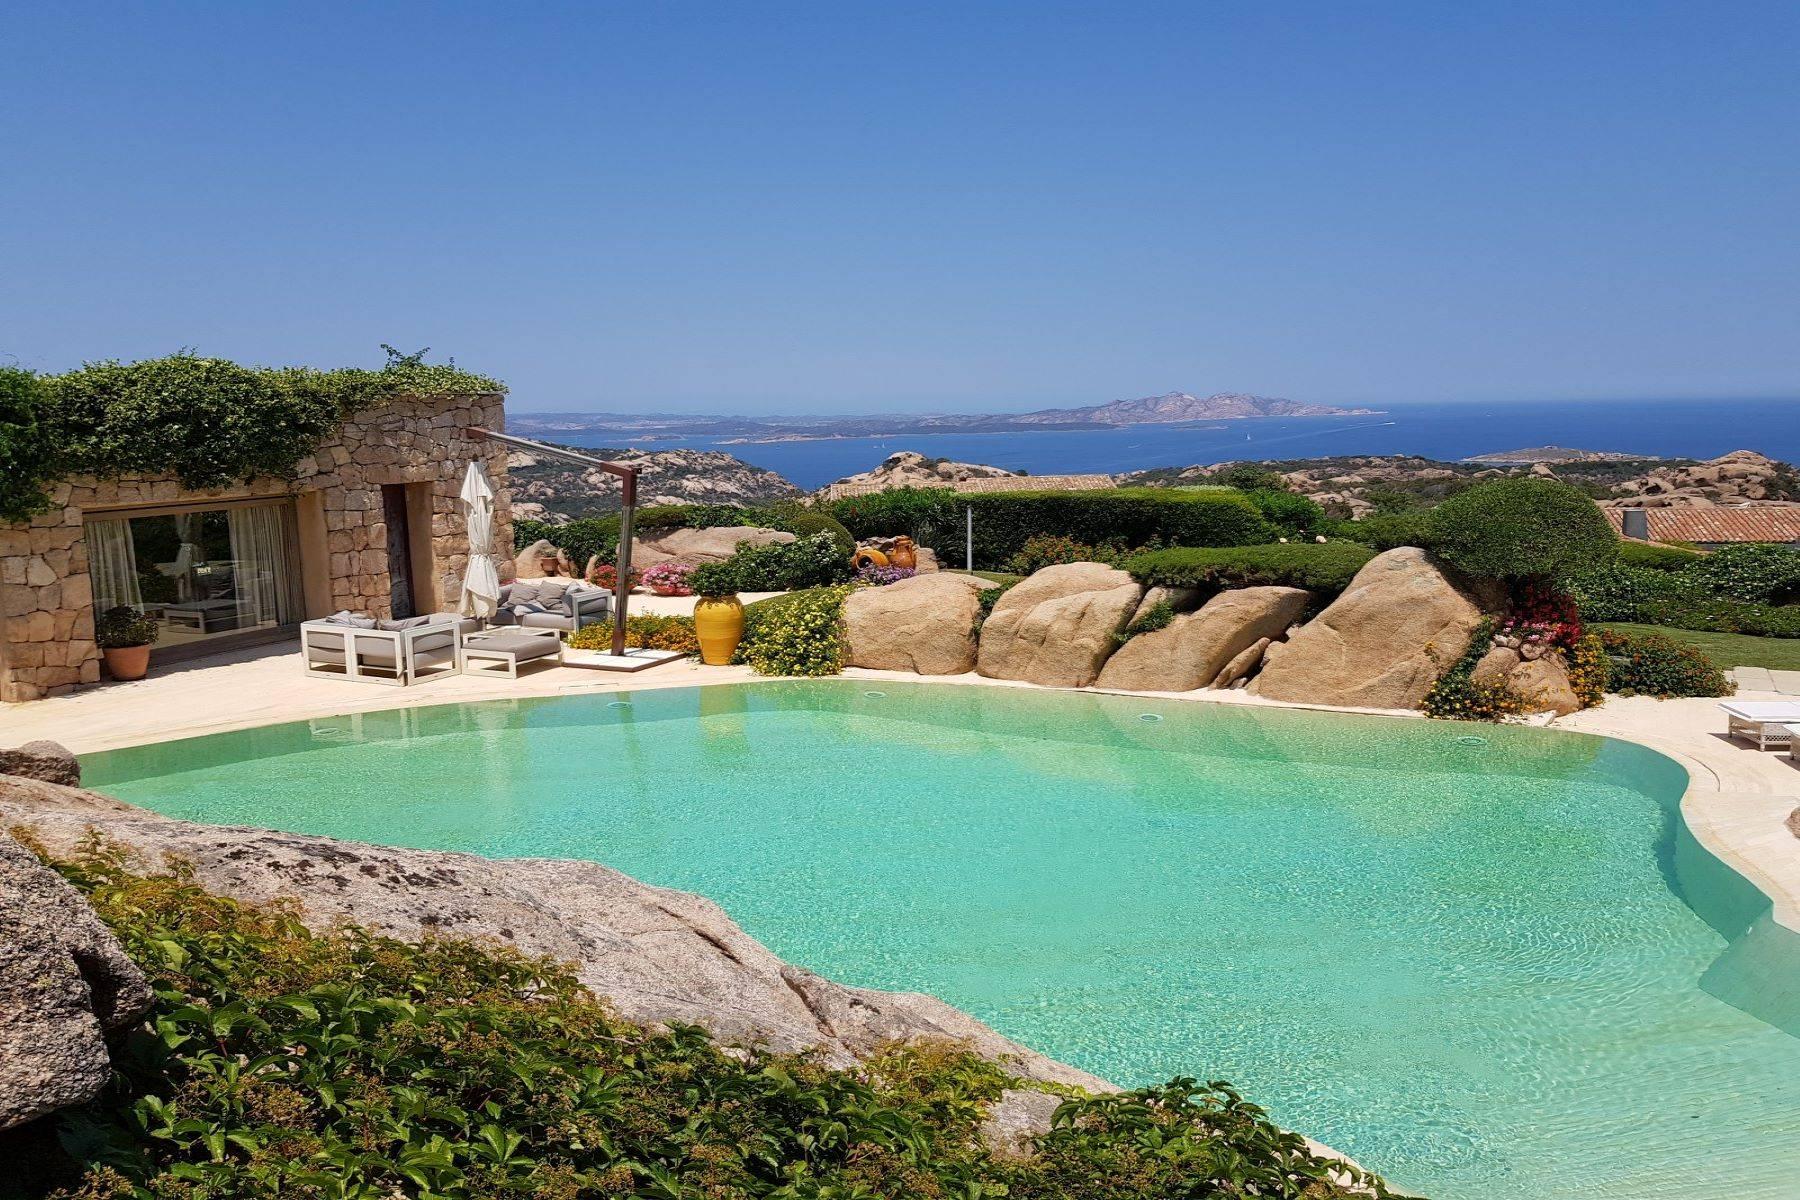 Exclusive property with stunning sea views overlooking the Costa Smeralda - 5